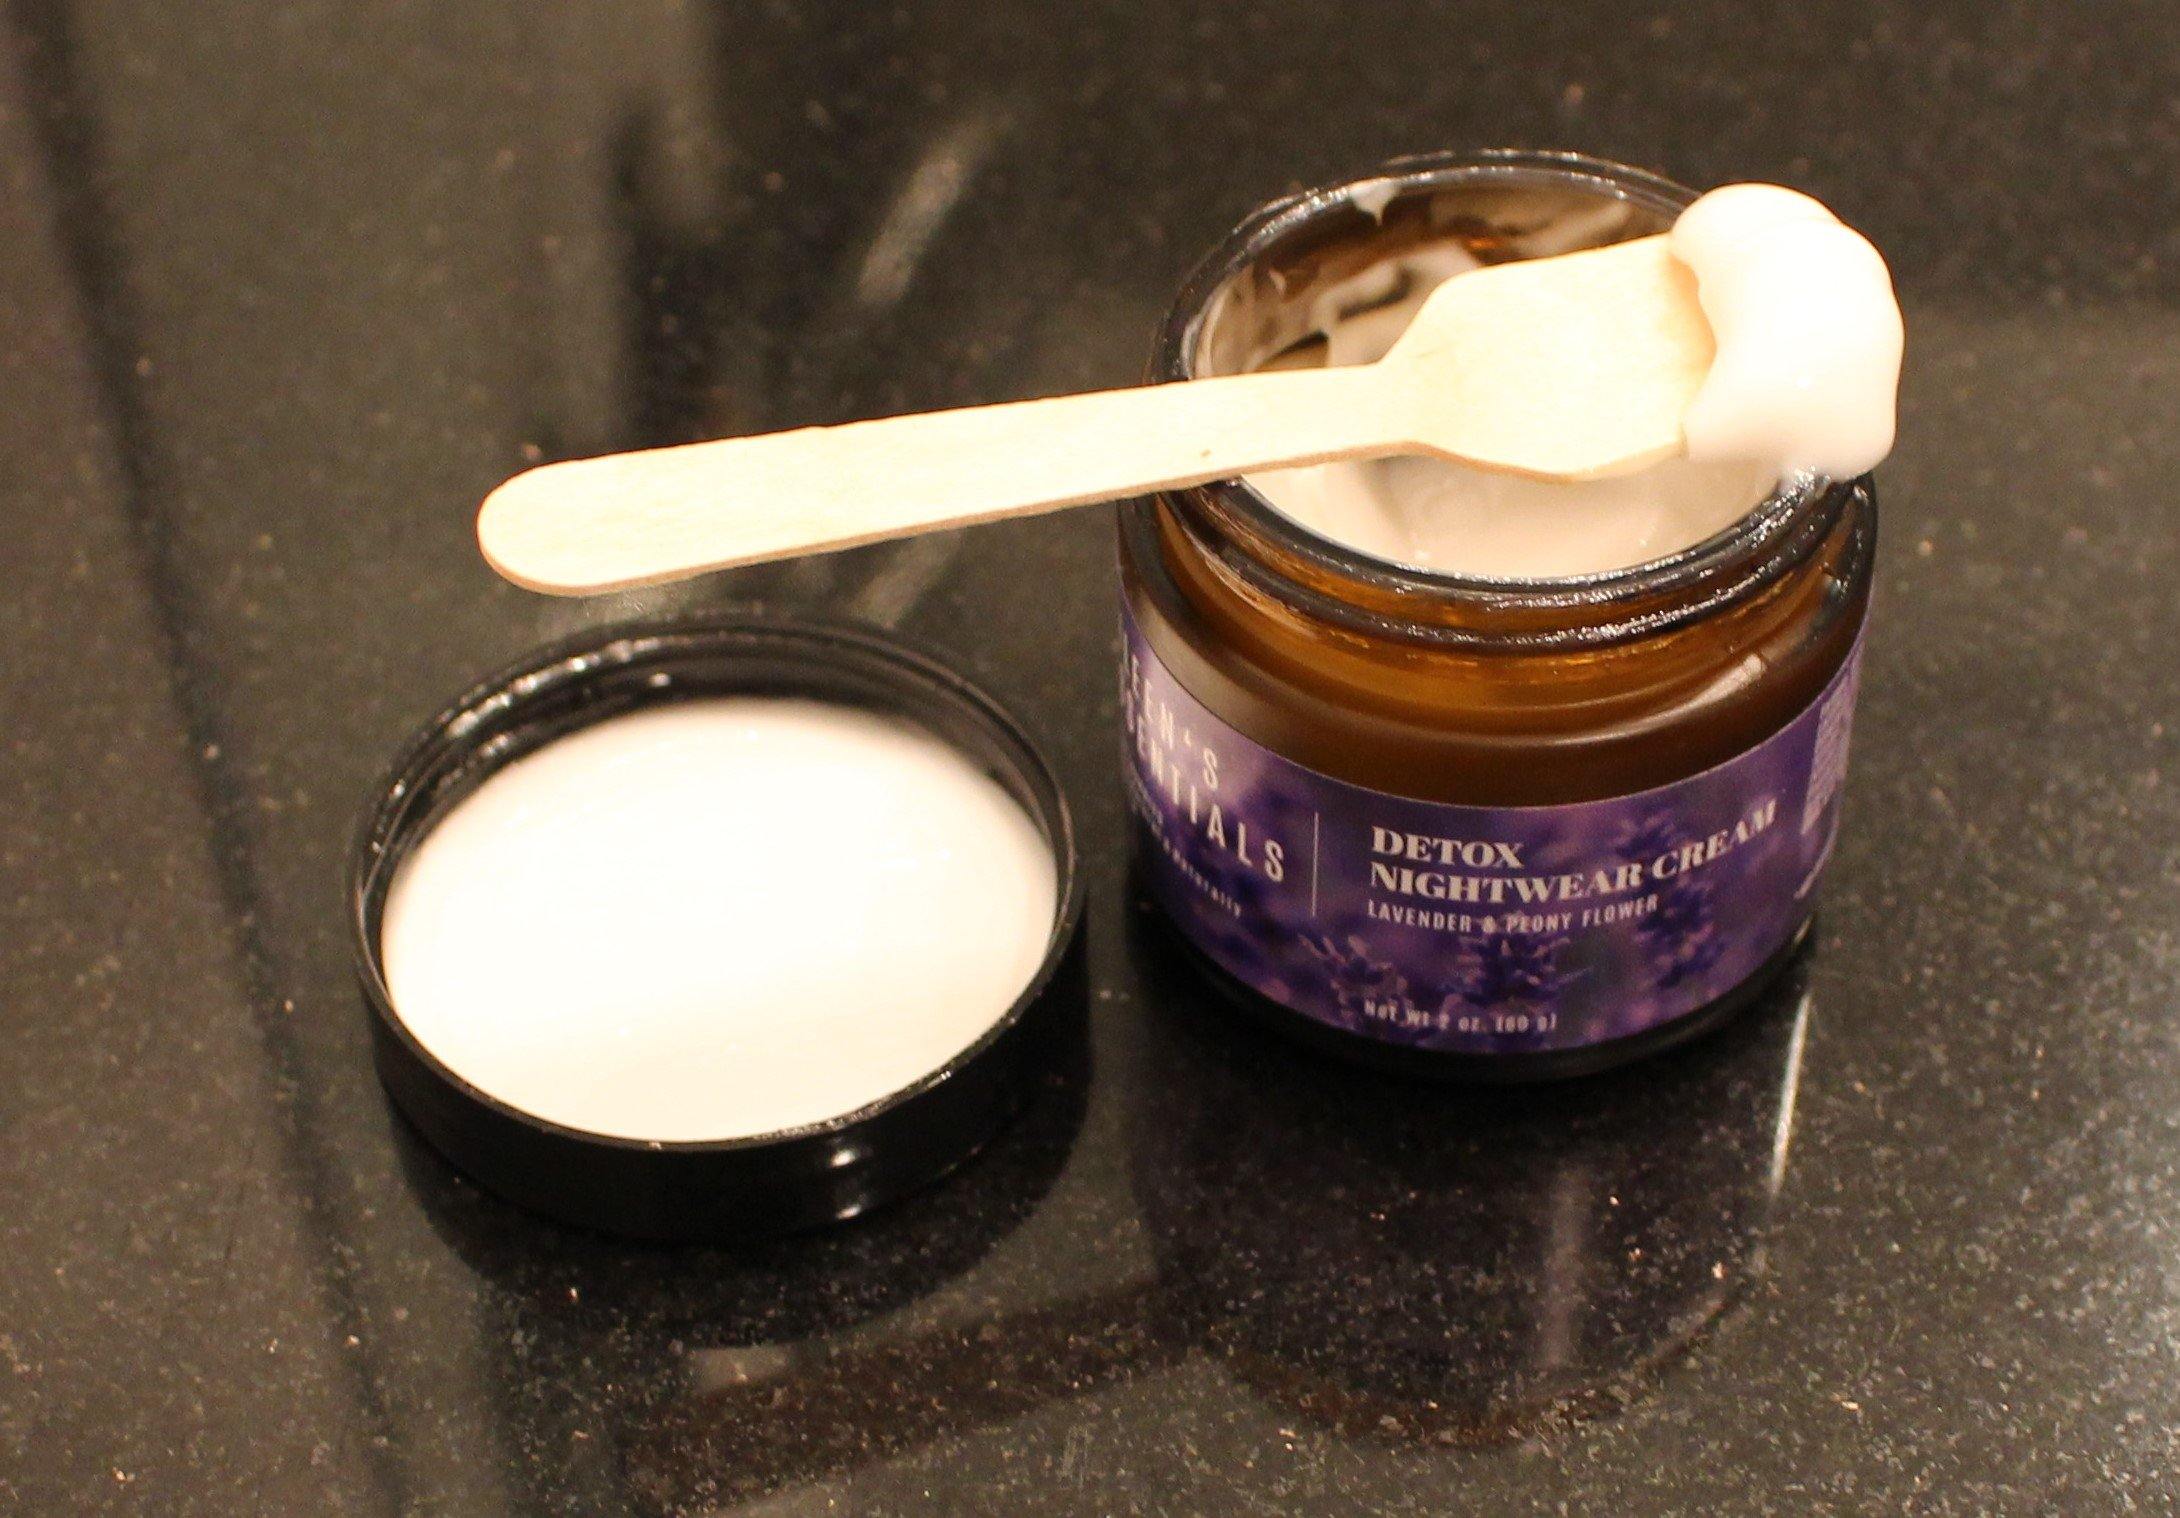 Nightwear Cream with Lavender and Peony - Eileen's Essentials